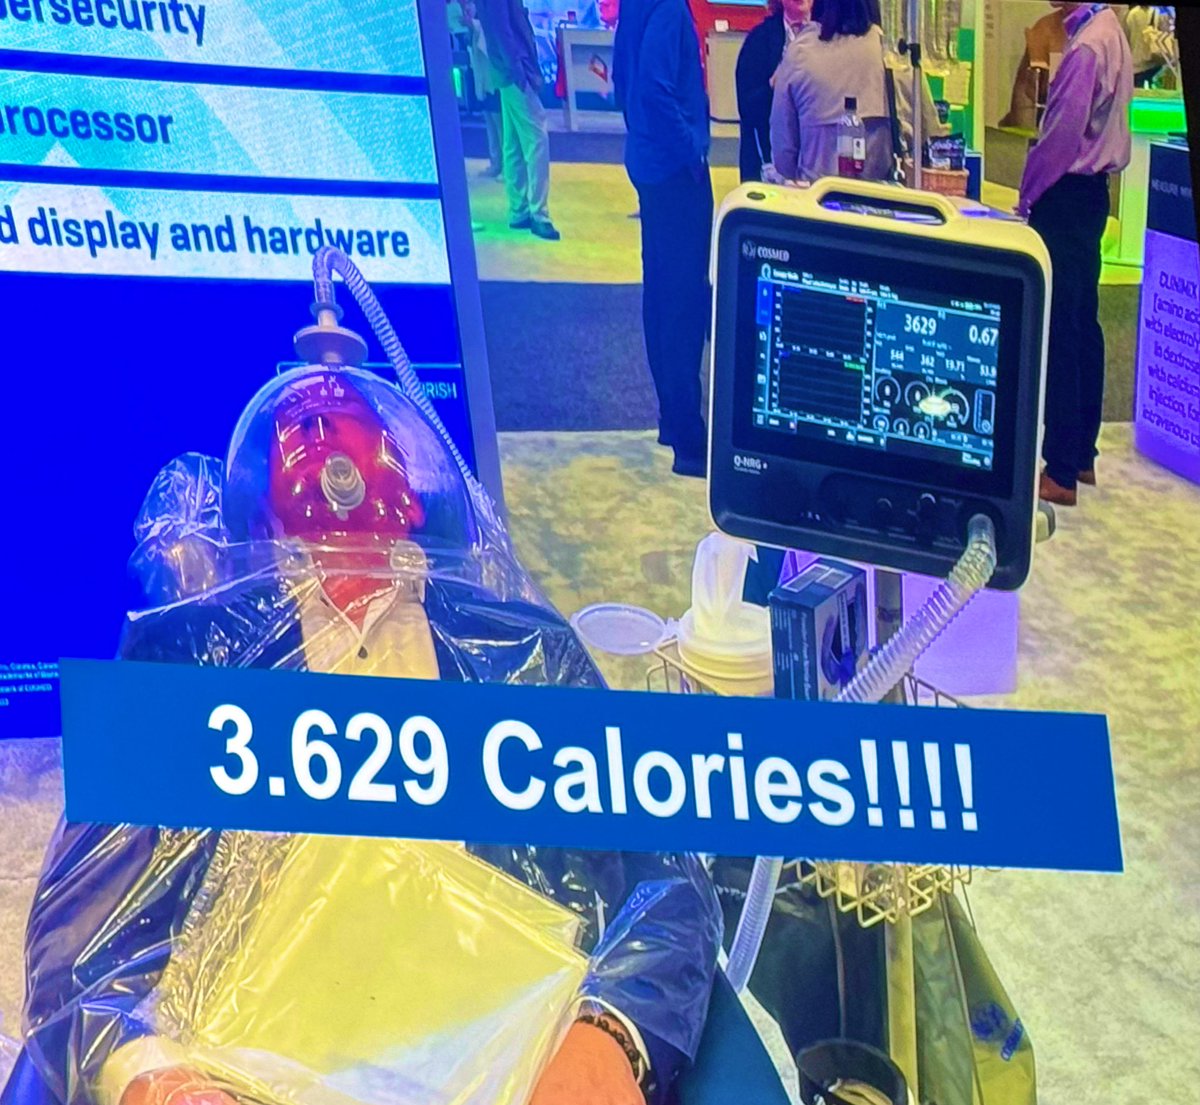 Amazing lecture by @DrKristaHaines on Personalizing ICU Nutrition at #ASPEN24 💫 Definitely a rising superstar in clinical nutrition field! 🤩Yes- that is me with an indirect calorimetry energy expenditure of 3,629 kcal/d #ICUNutrition @ASPEN_nutrition @DukeSurgery